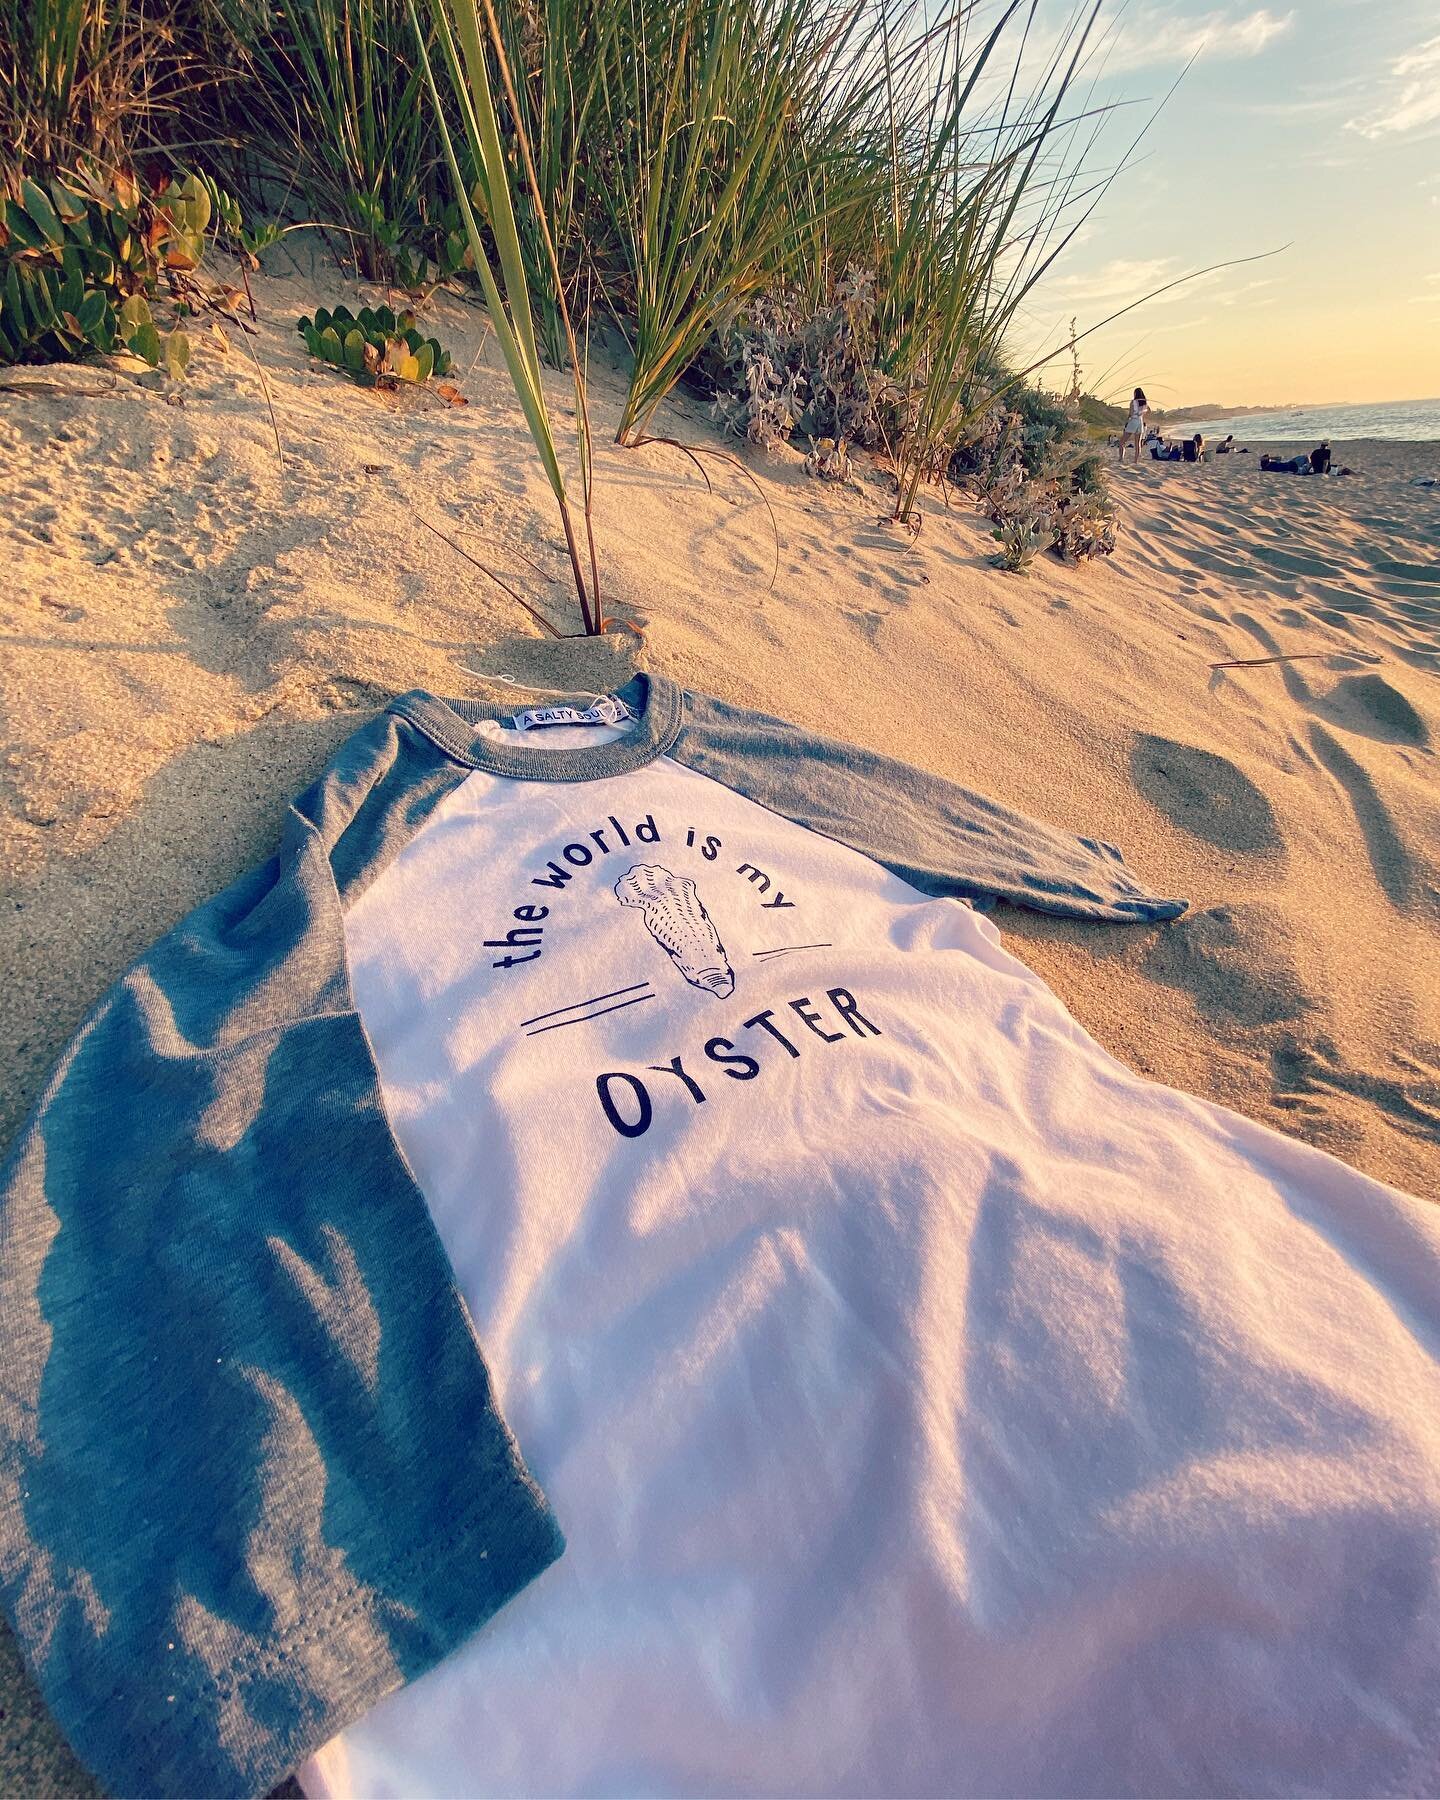 Yes it is🙌 Kid&rsquo;s tees available online. 
#ASaltySoul #Nantucket